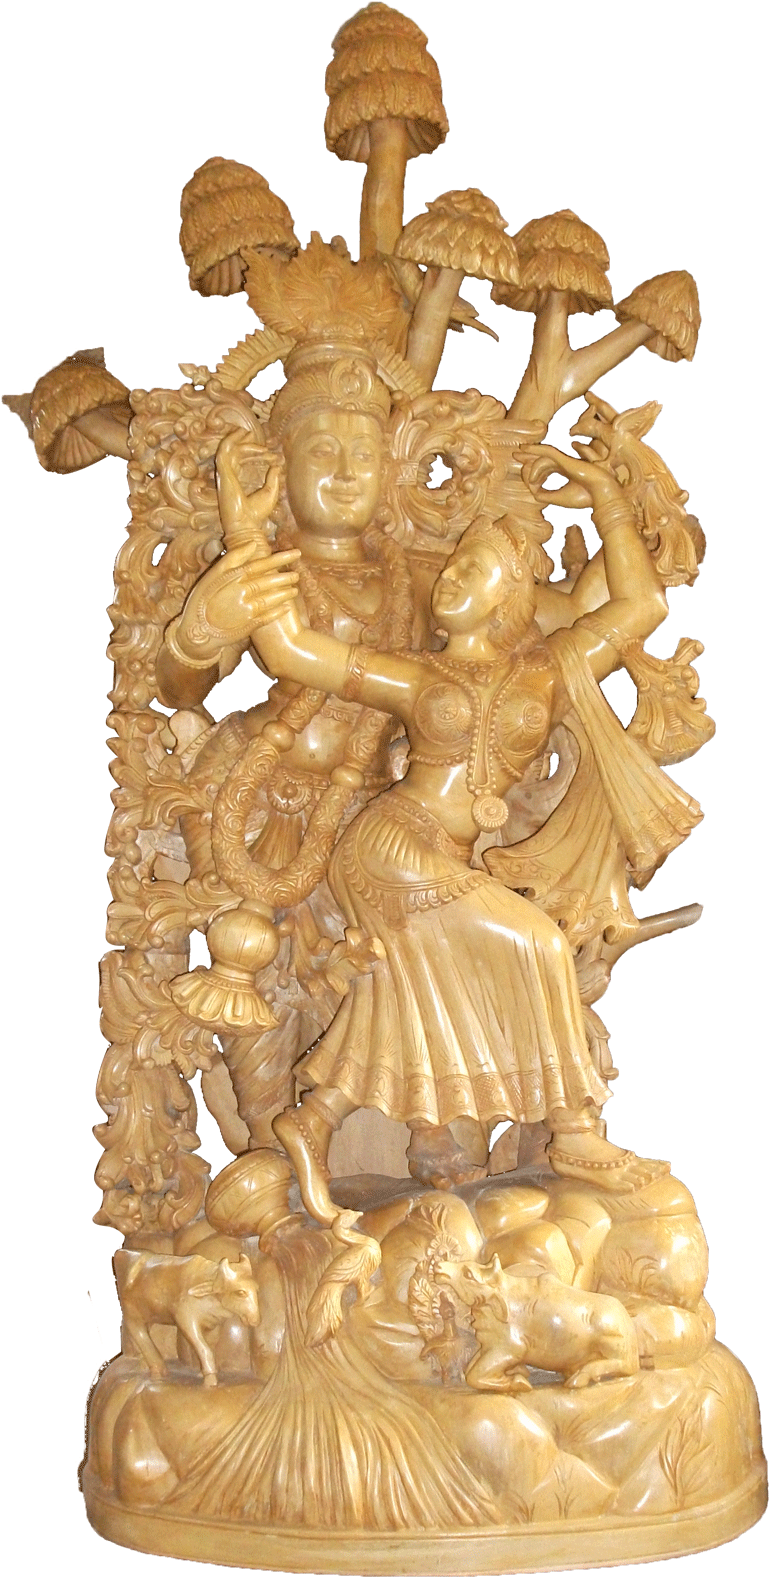 A Statue Of A Couple Dancing